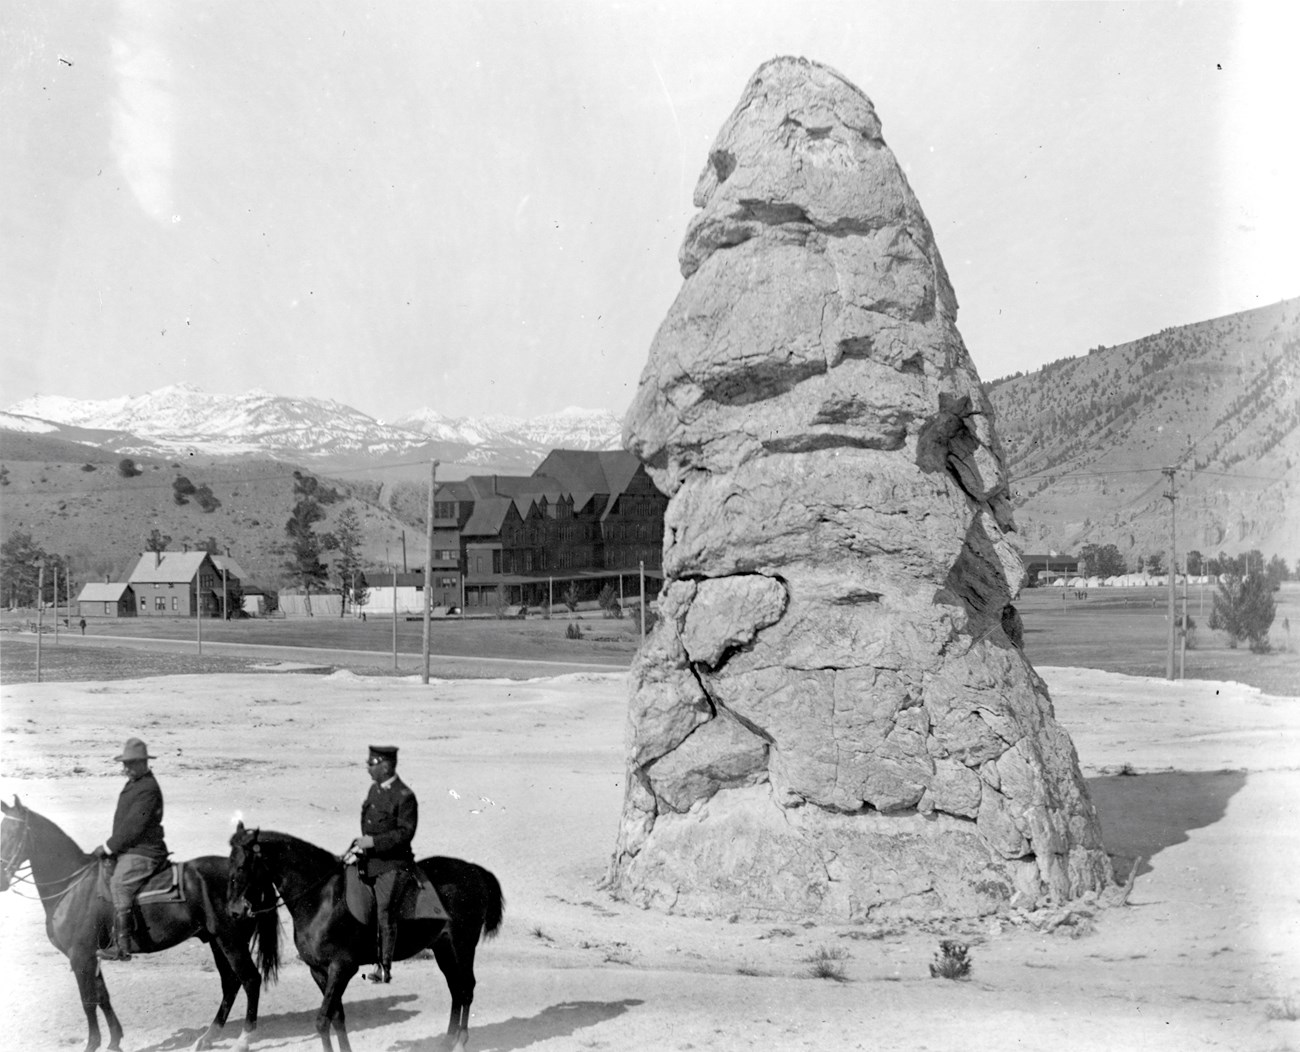 Two men on horseback in front of a tall rock cone